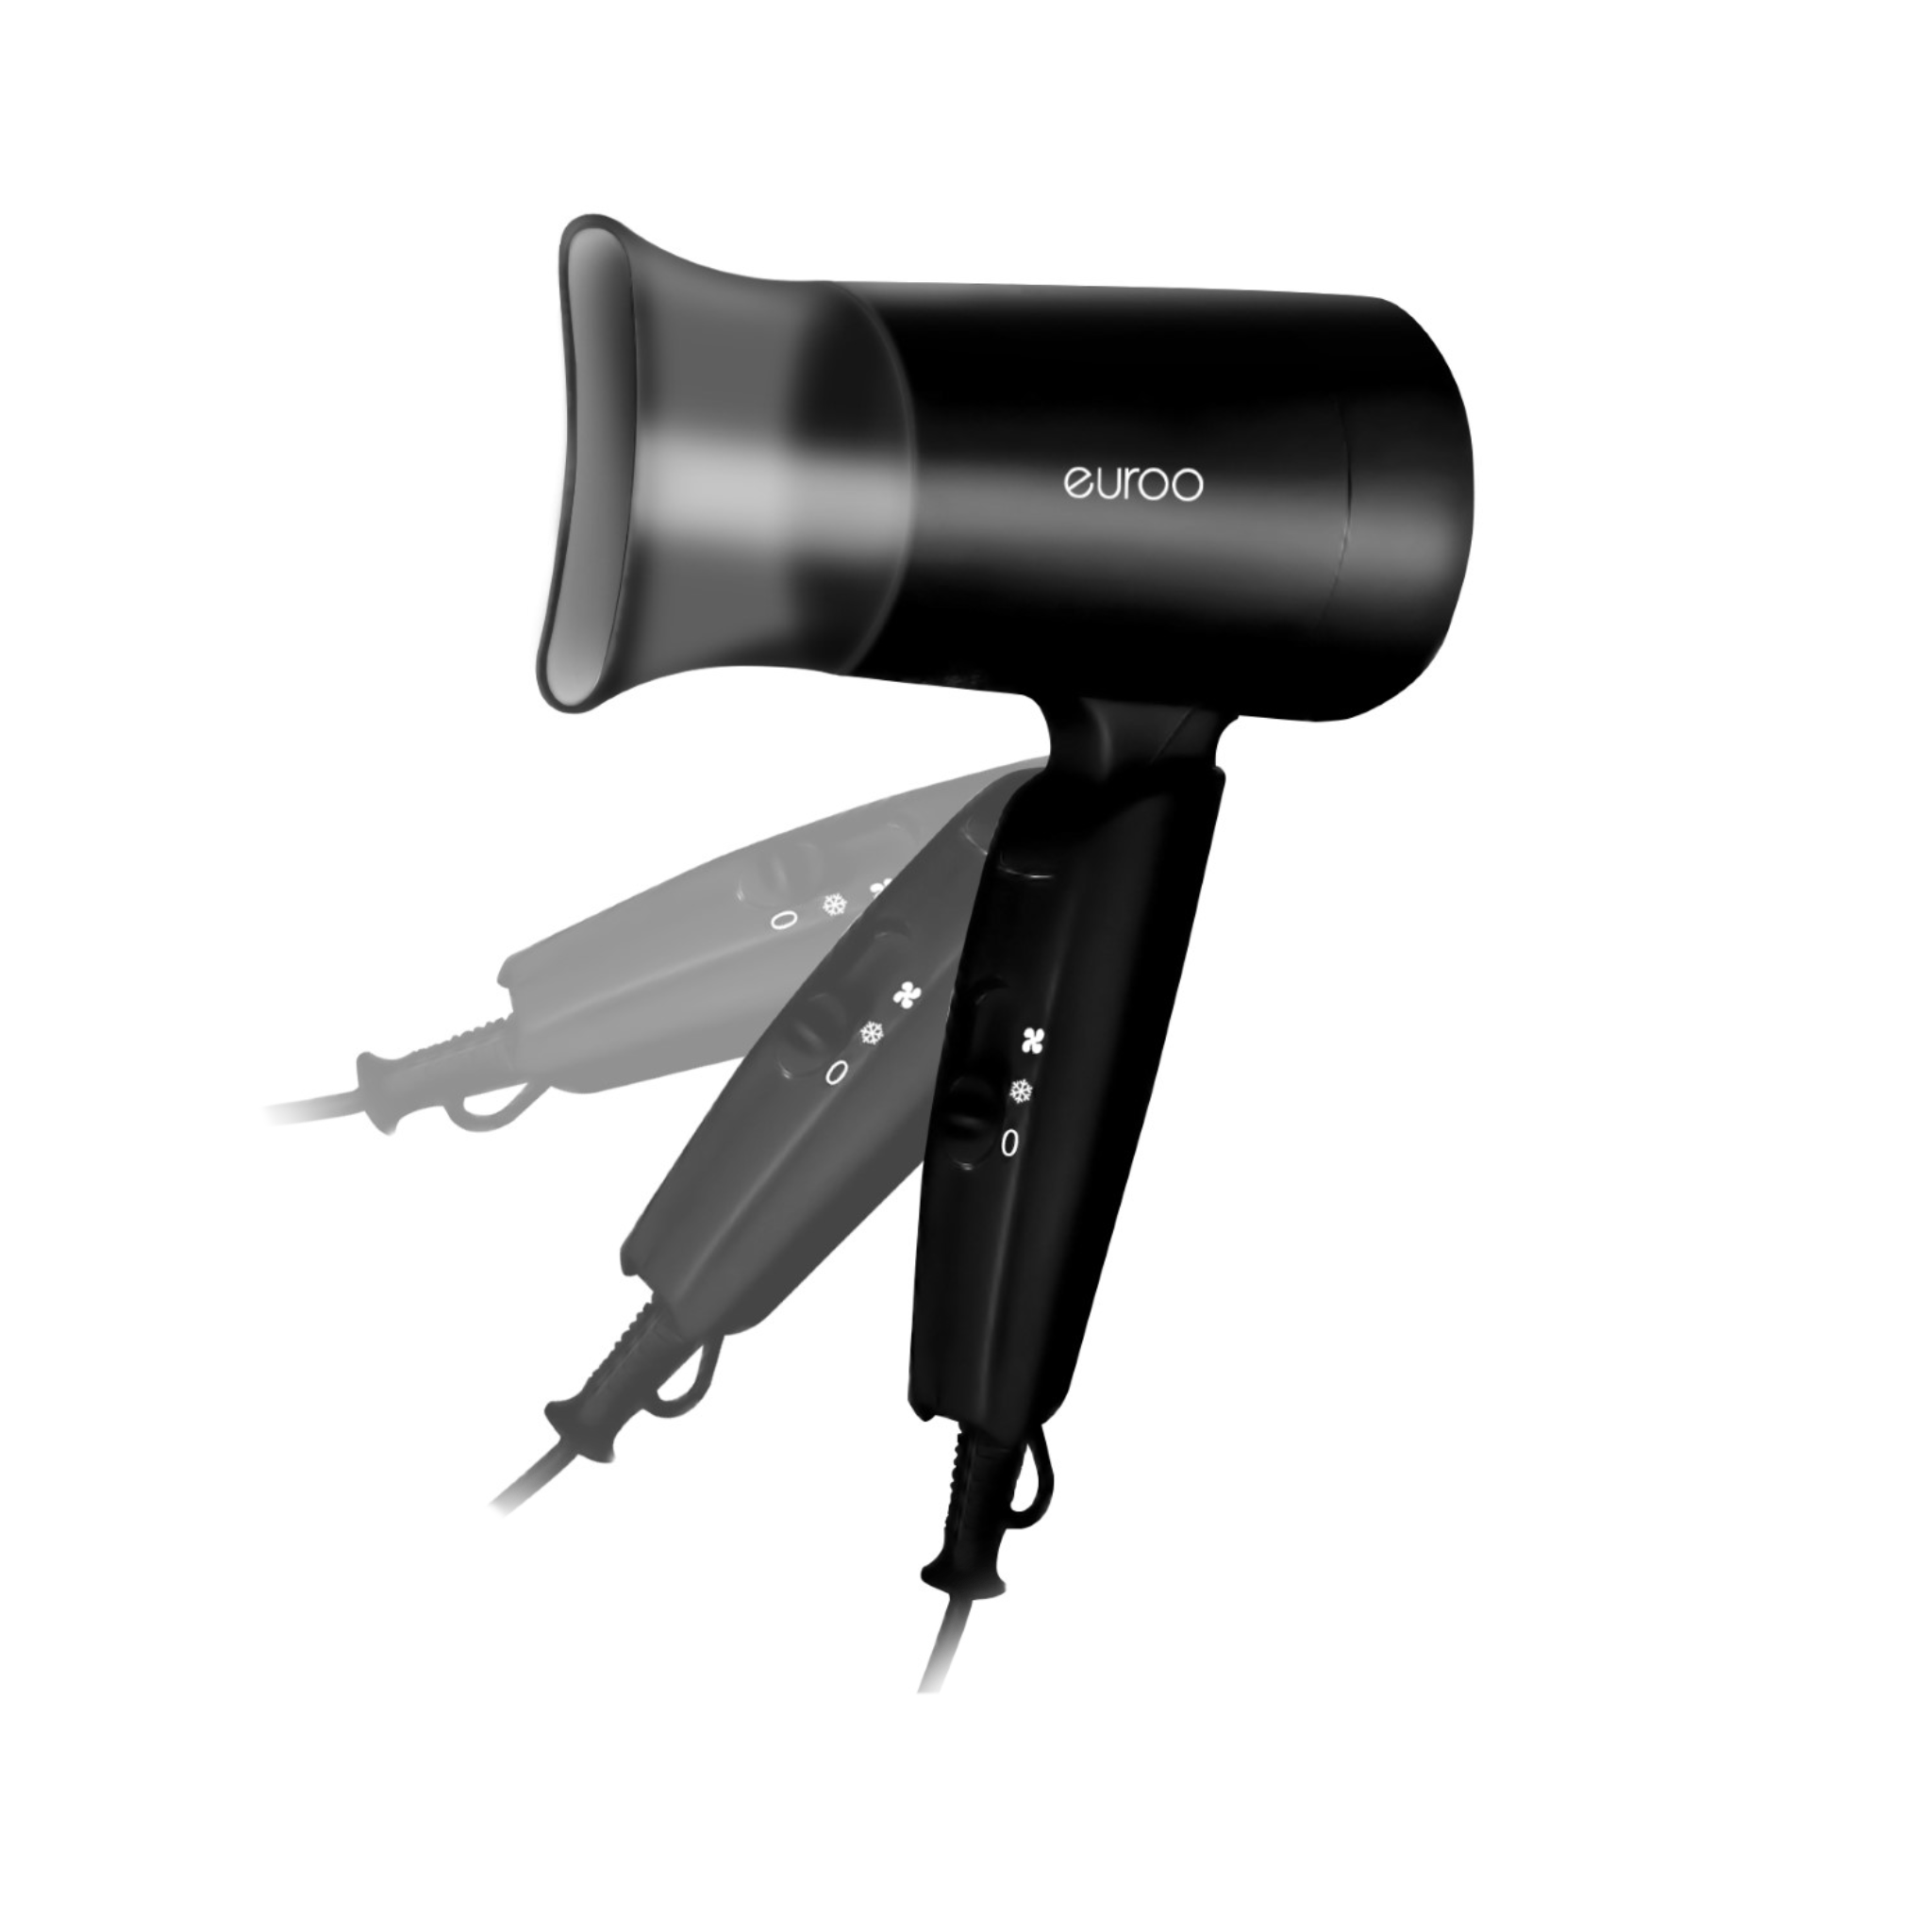 EUROO EPC-201F Foldable Hair Dryer (ONLINE EXCLUSIVE)